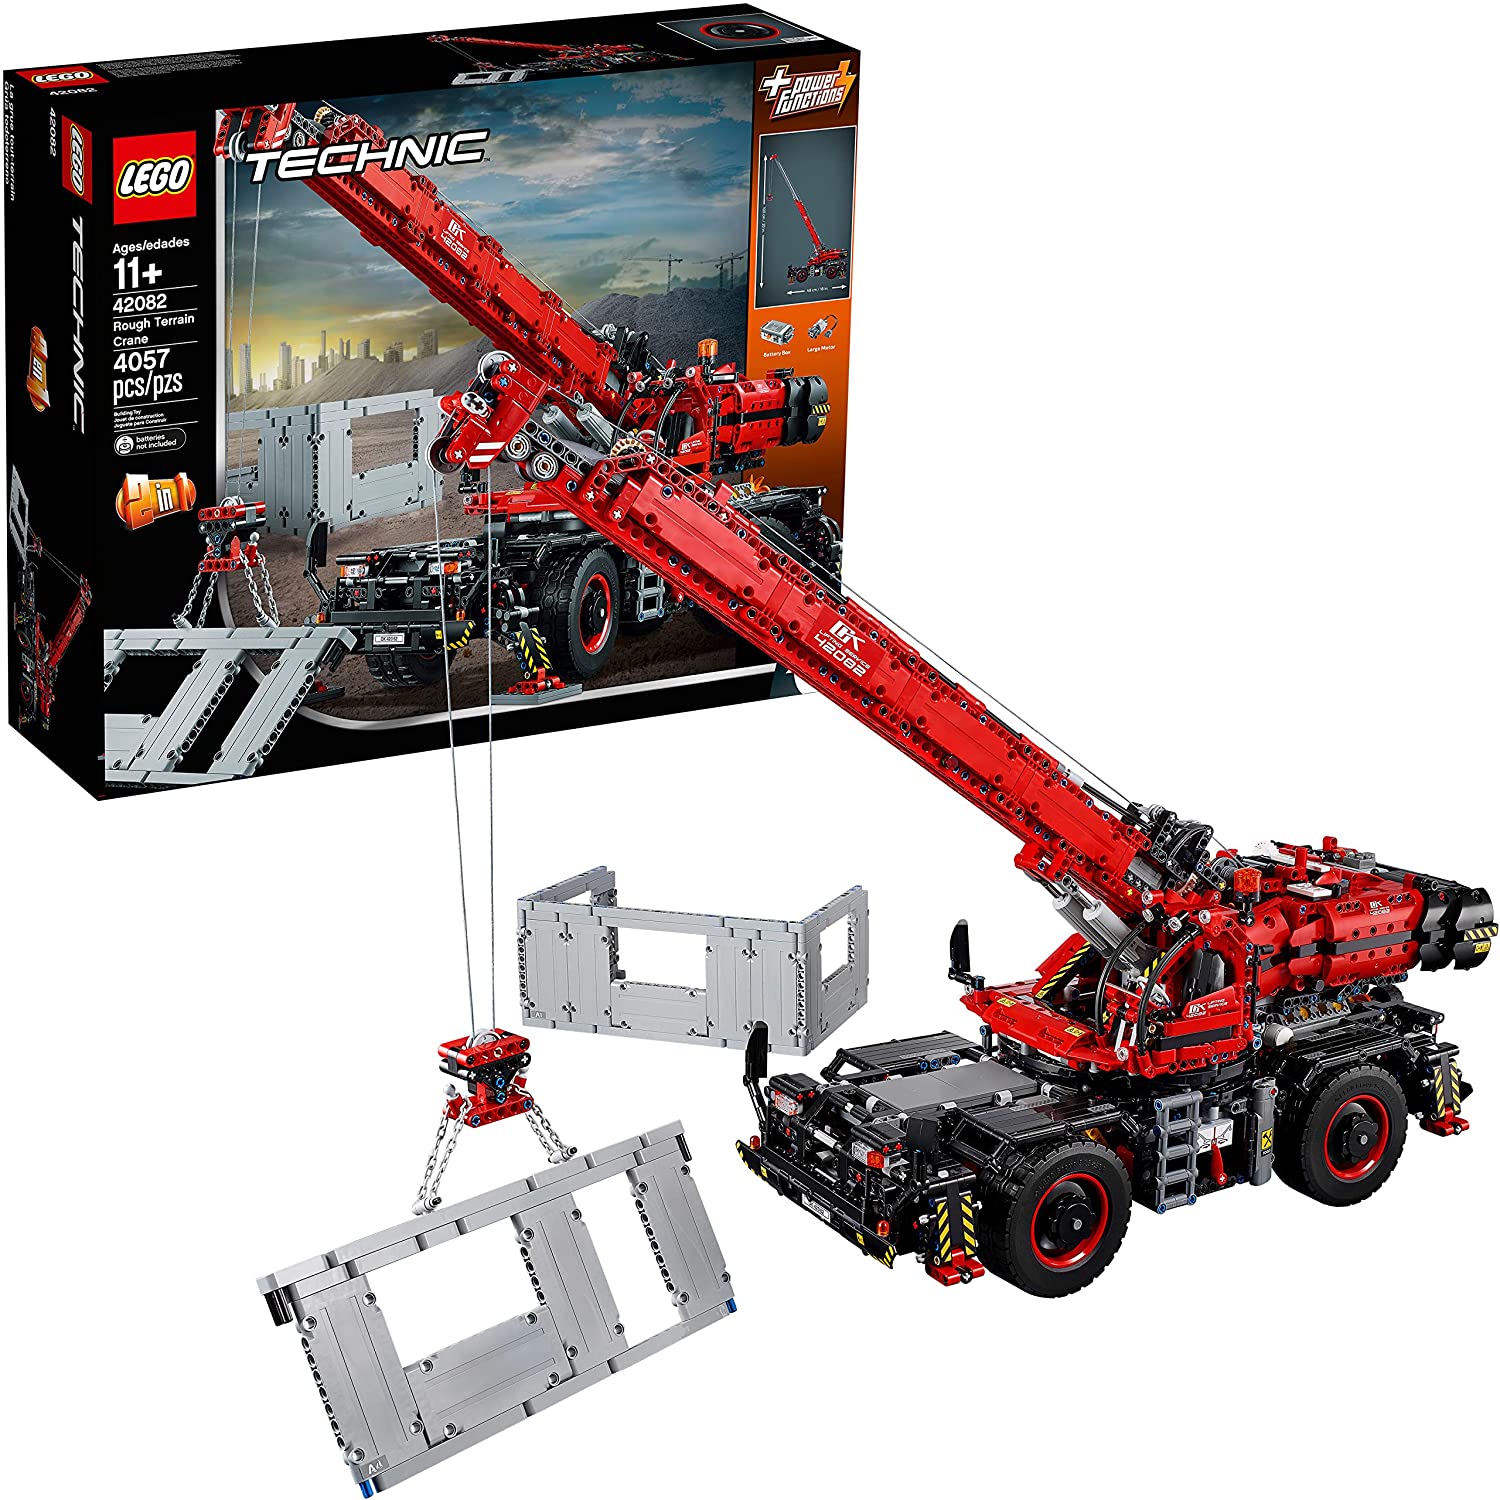 7 Best LEGO Crane Sets 2023 - Buying Guide & Reviews 1